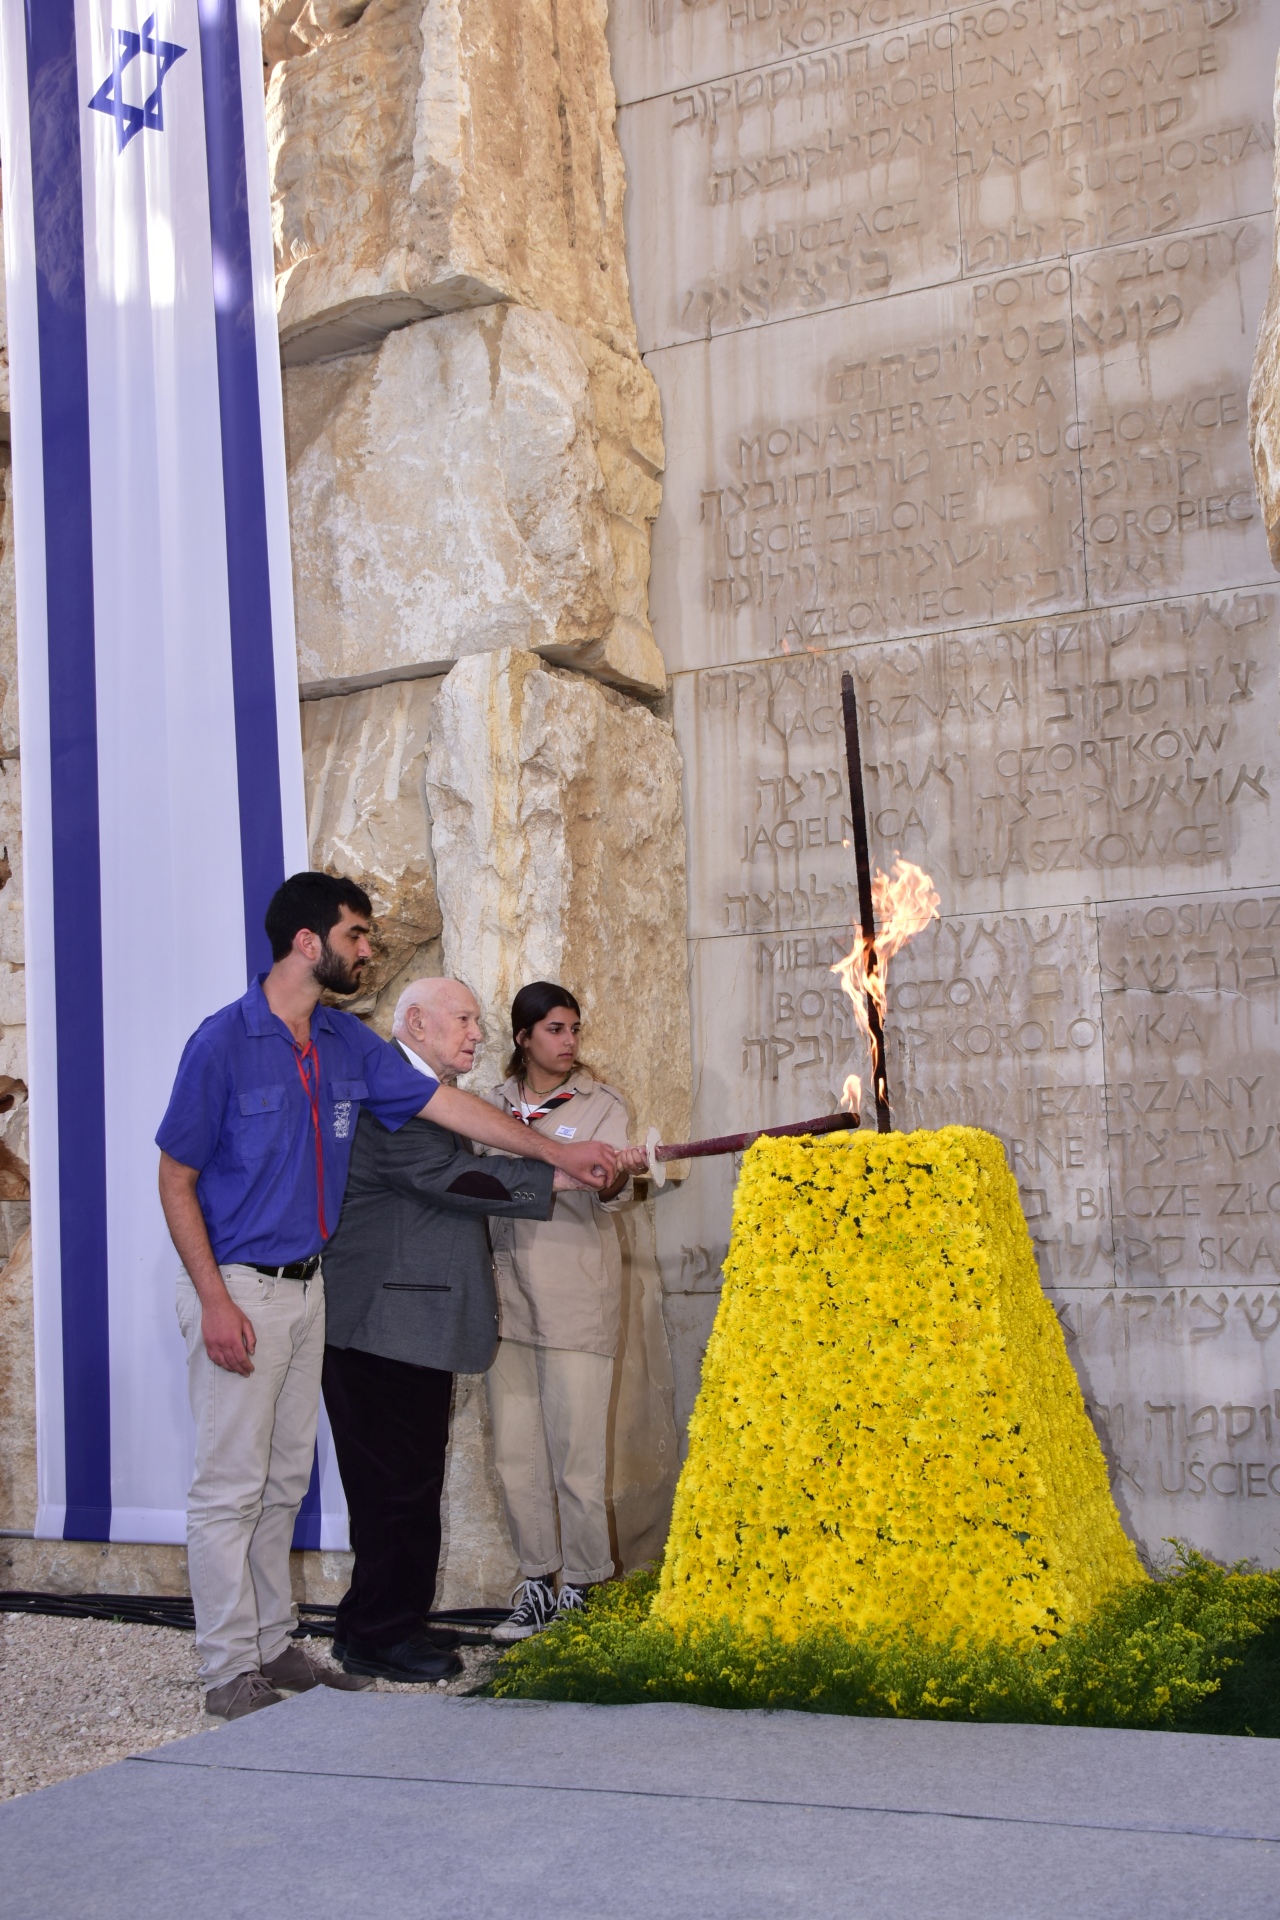 Holocaust survivor Nachum Rotenberg lit the Memorial Torch at the Youth Movement Ceremony